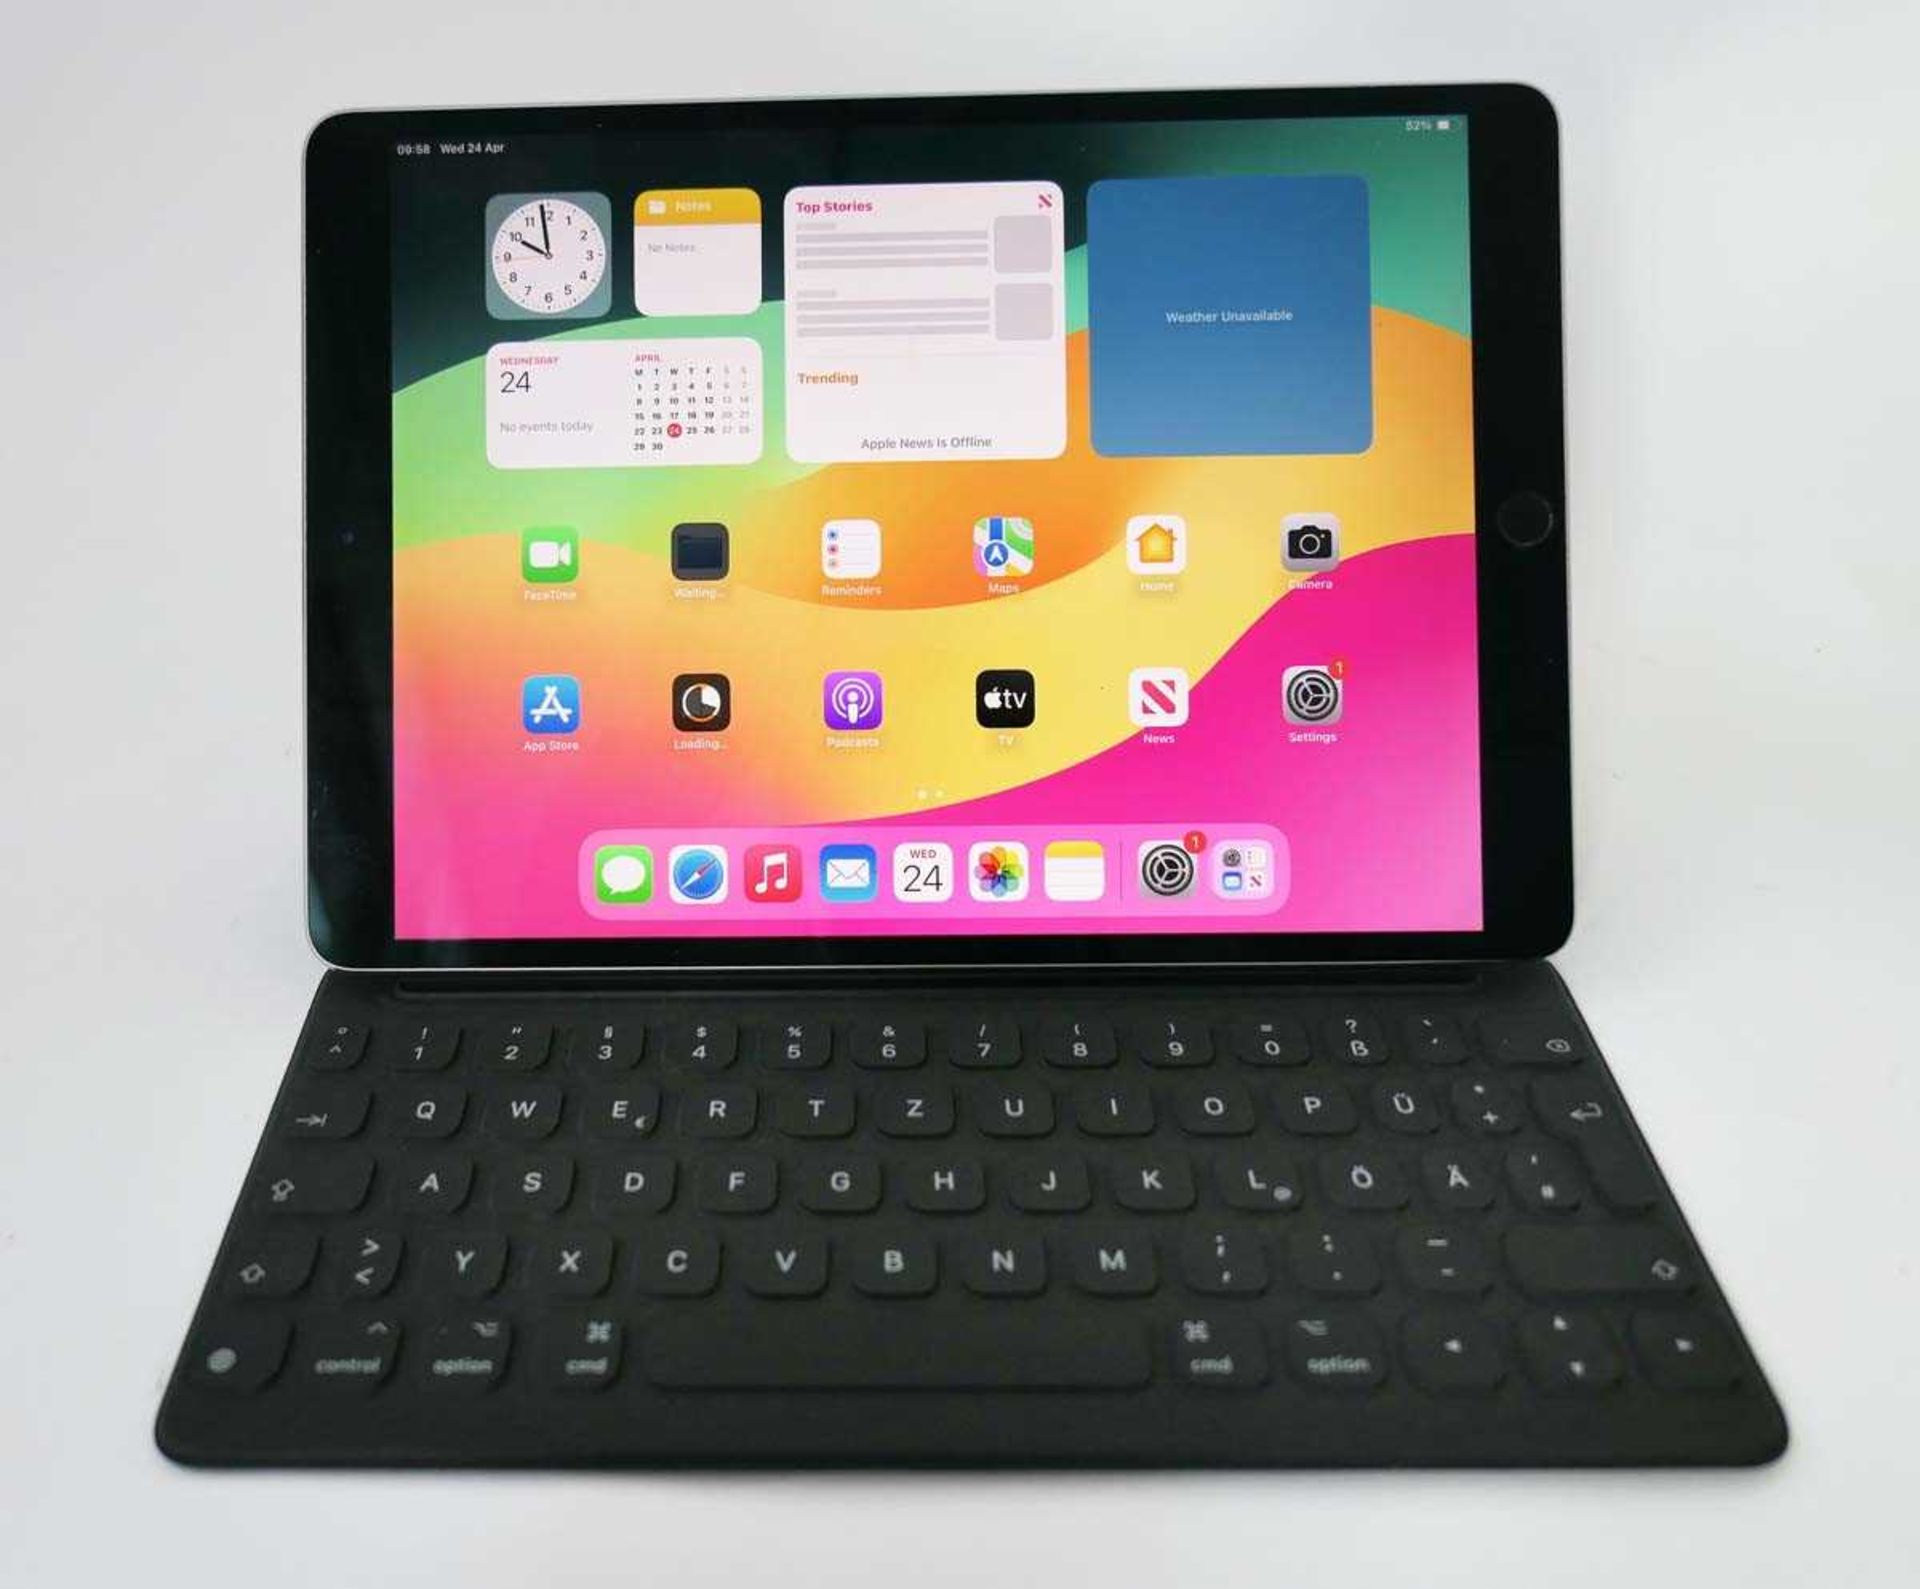 +VAT iPad Pro 10.5" Space Grey 64GB tablet with keyboard case